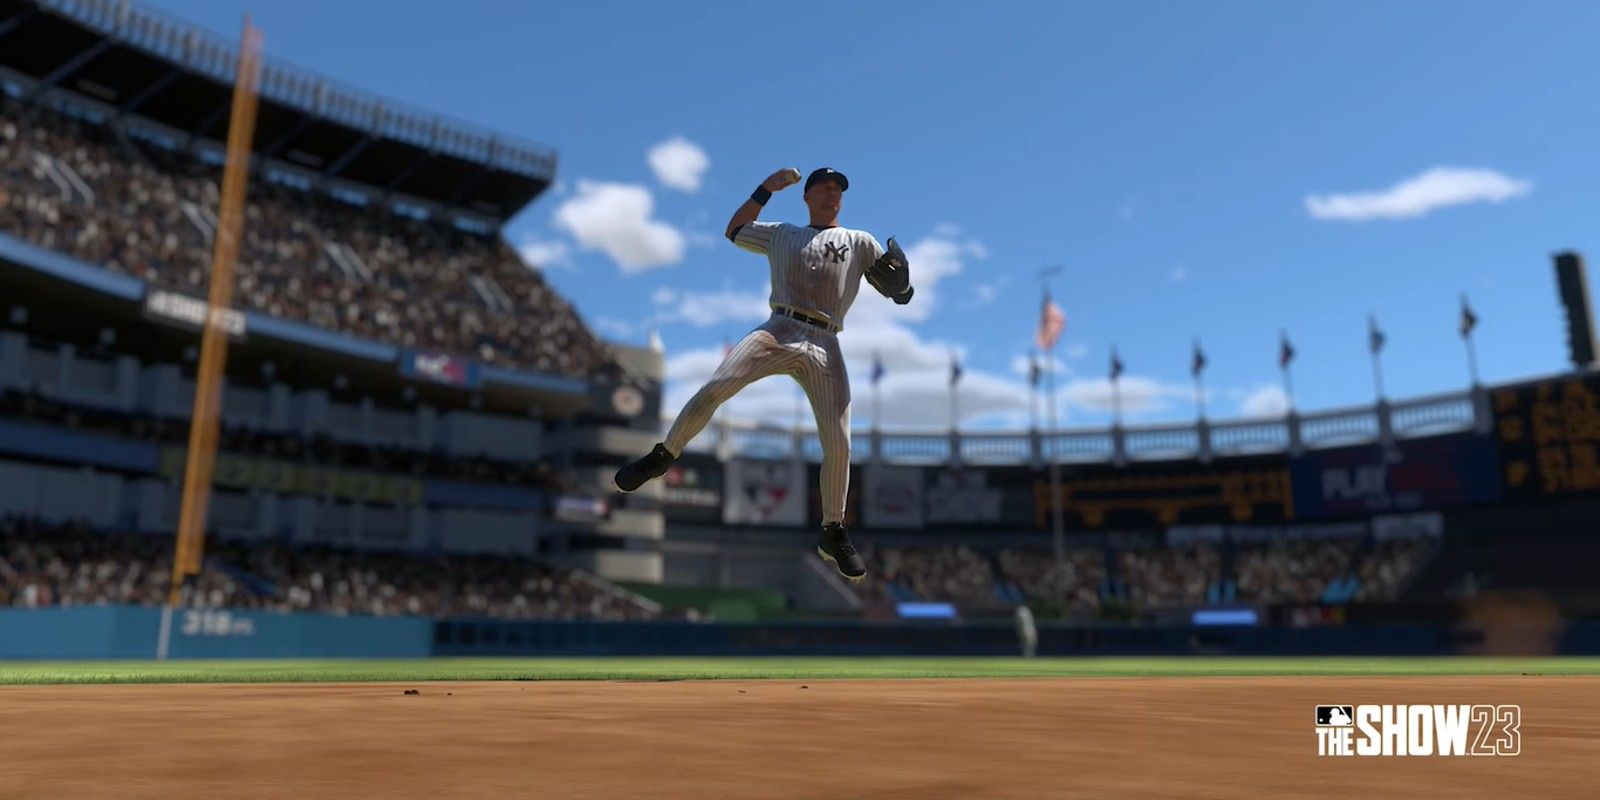 MLB the show fielder throwing the ball